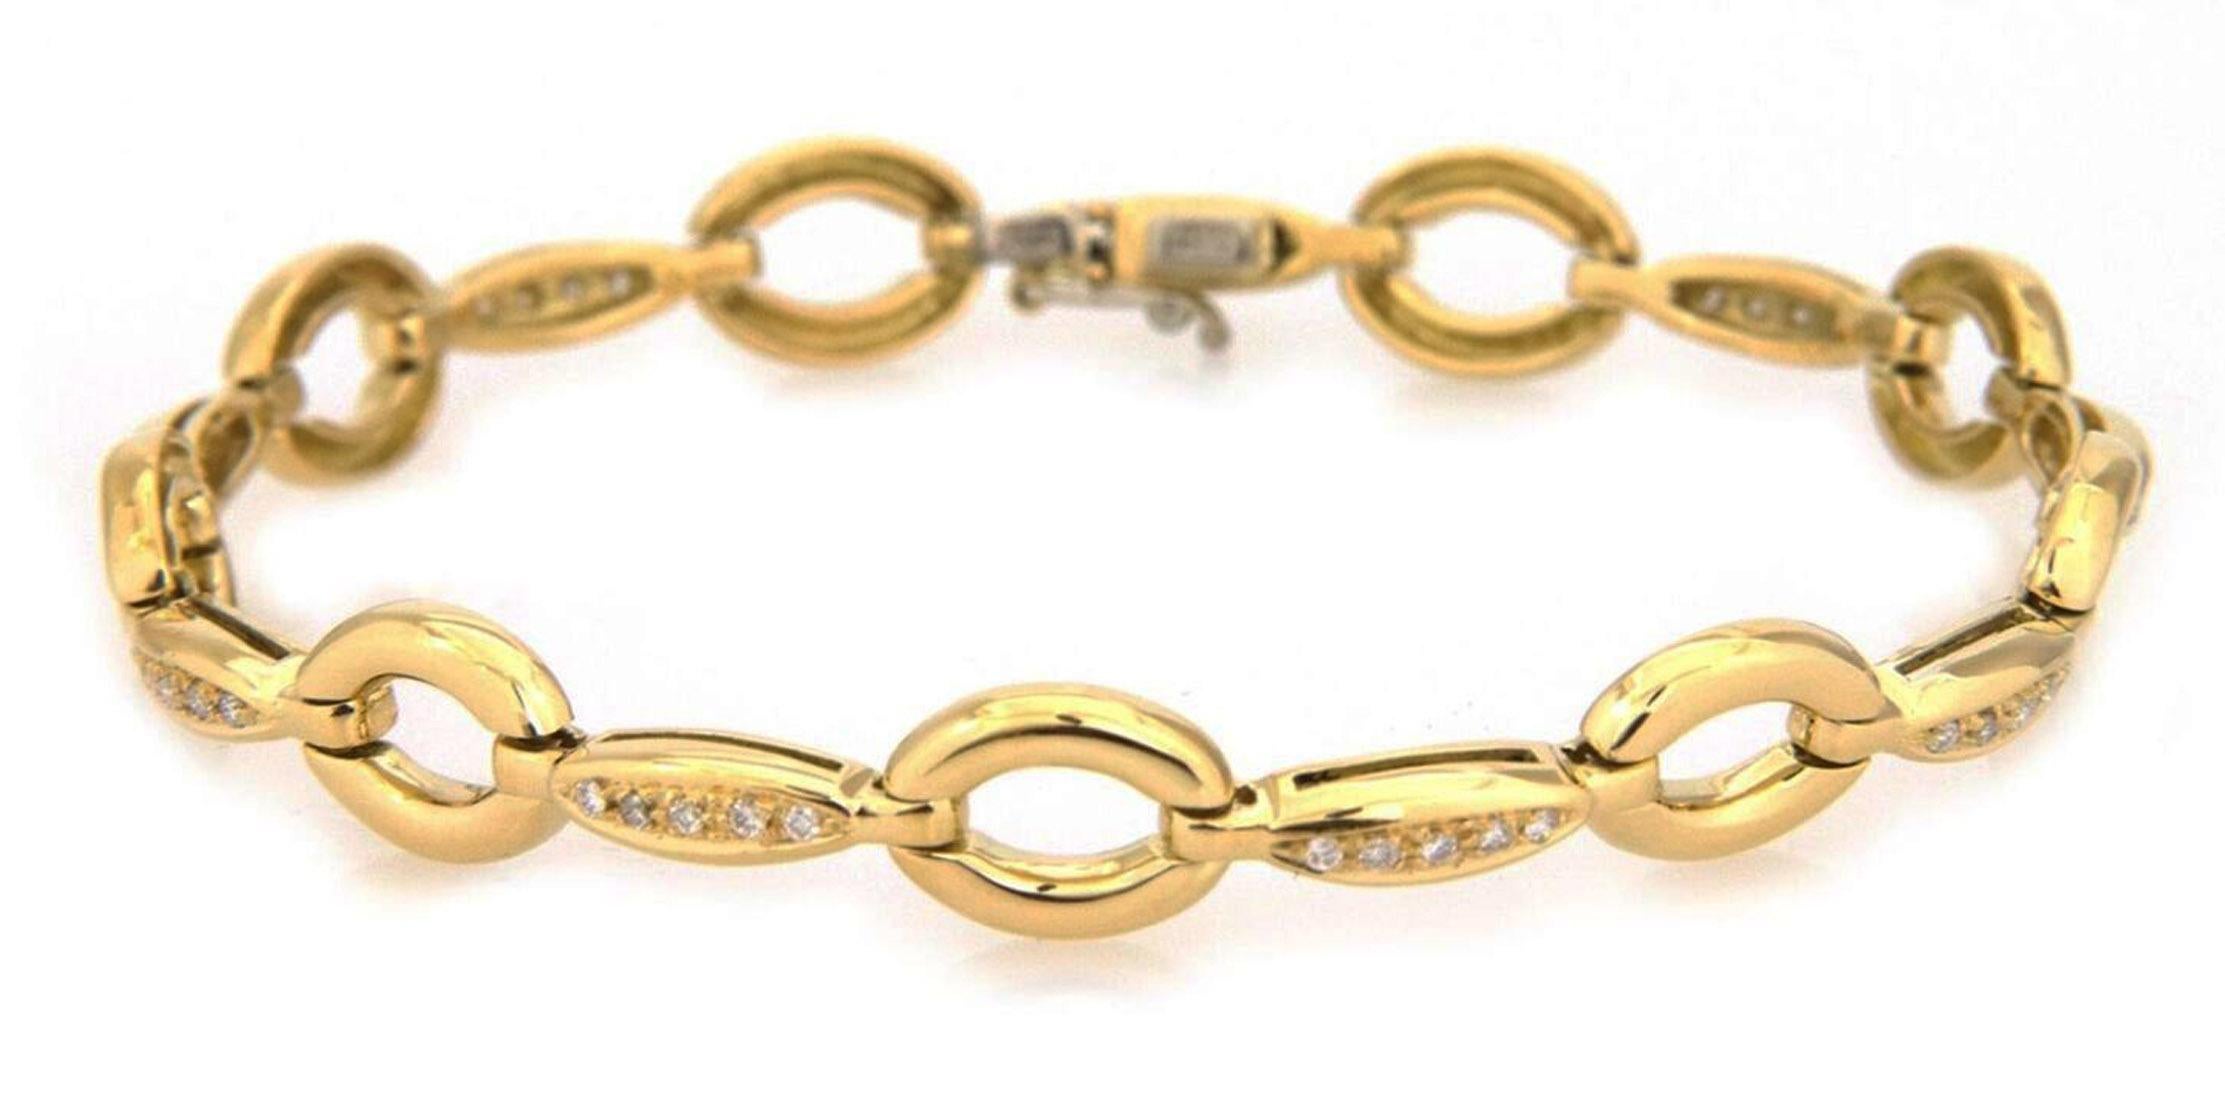 This is an elegant authentic bracelet from Aaron Basha, crafted from 18k yellow gold featuring alternating oval polished links with a long slim marquise bar link, each bar has a row of single cut diamonds, all totaling 21 points. The bracelet secure